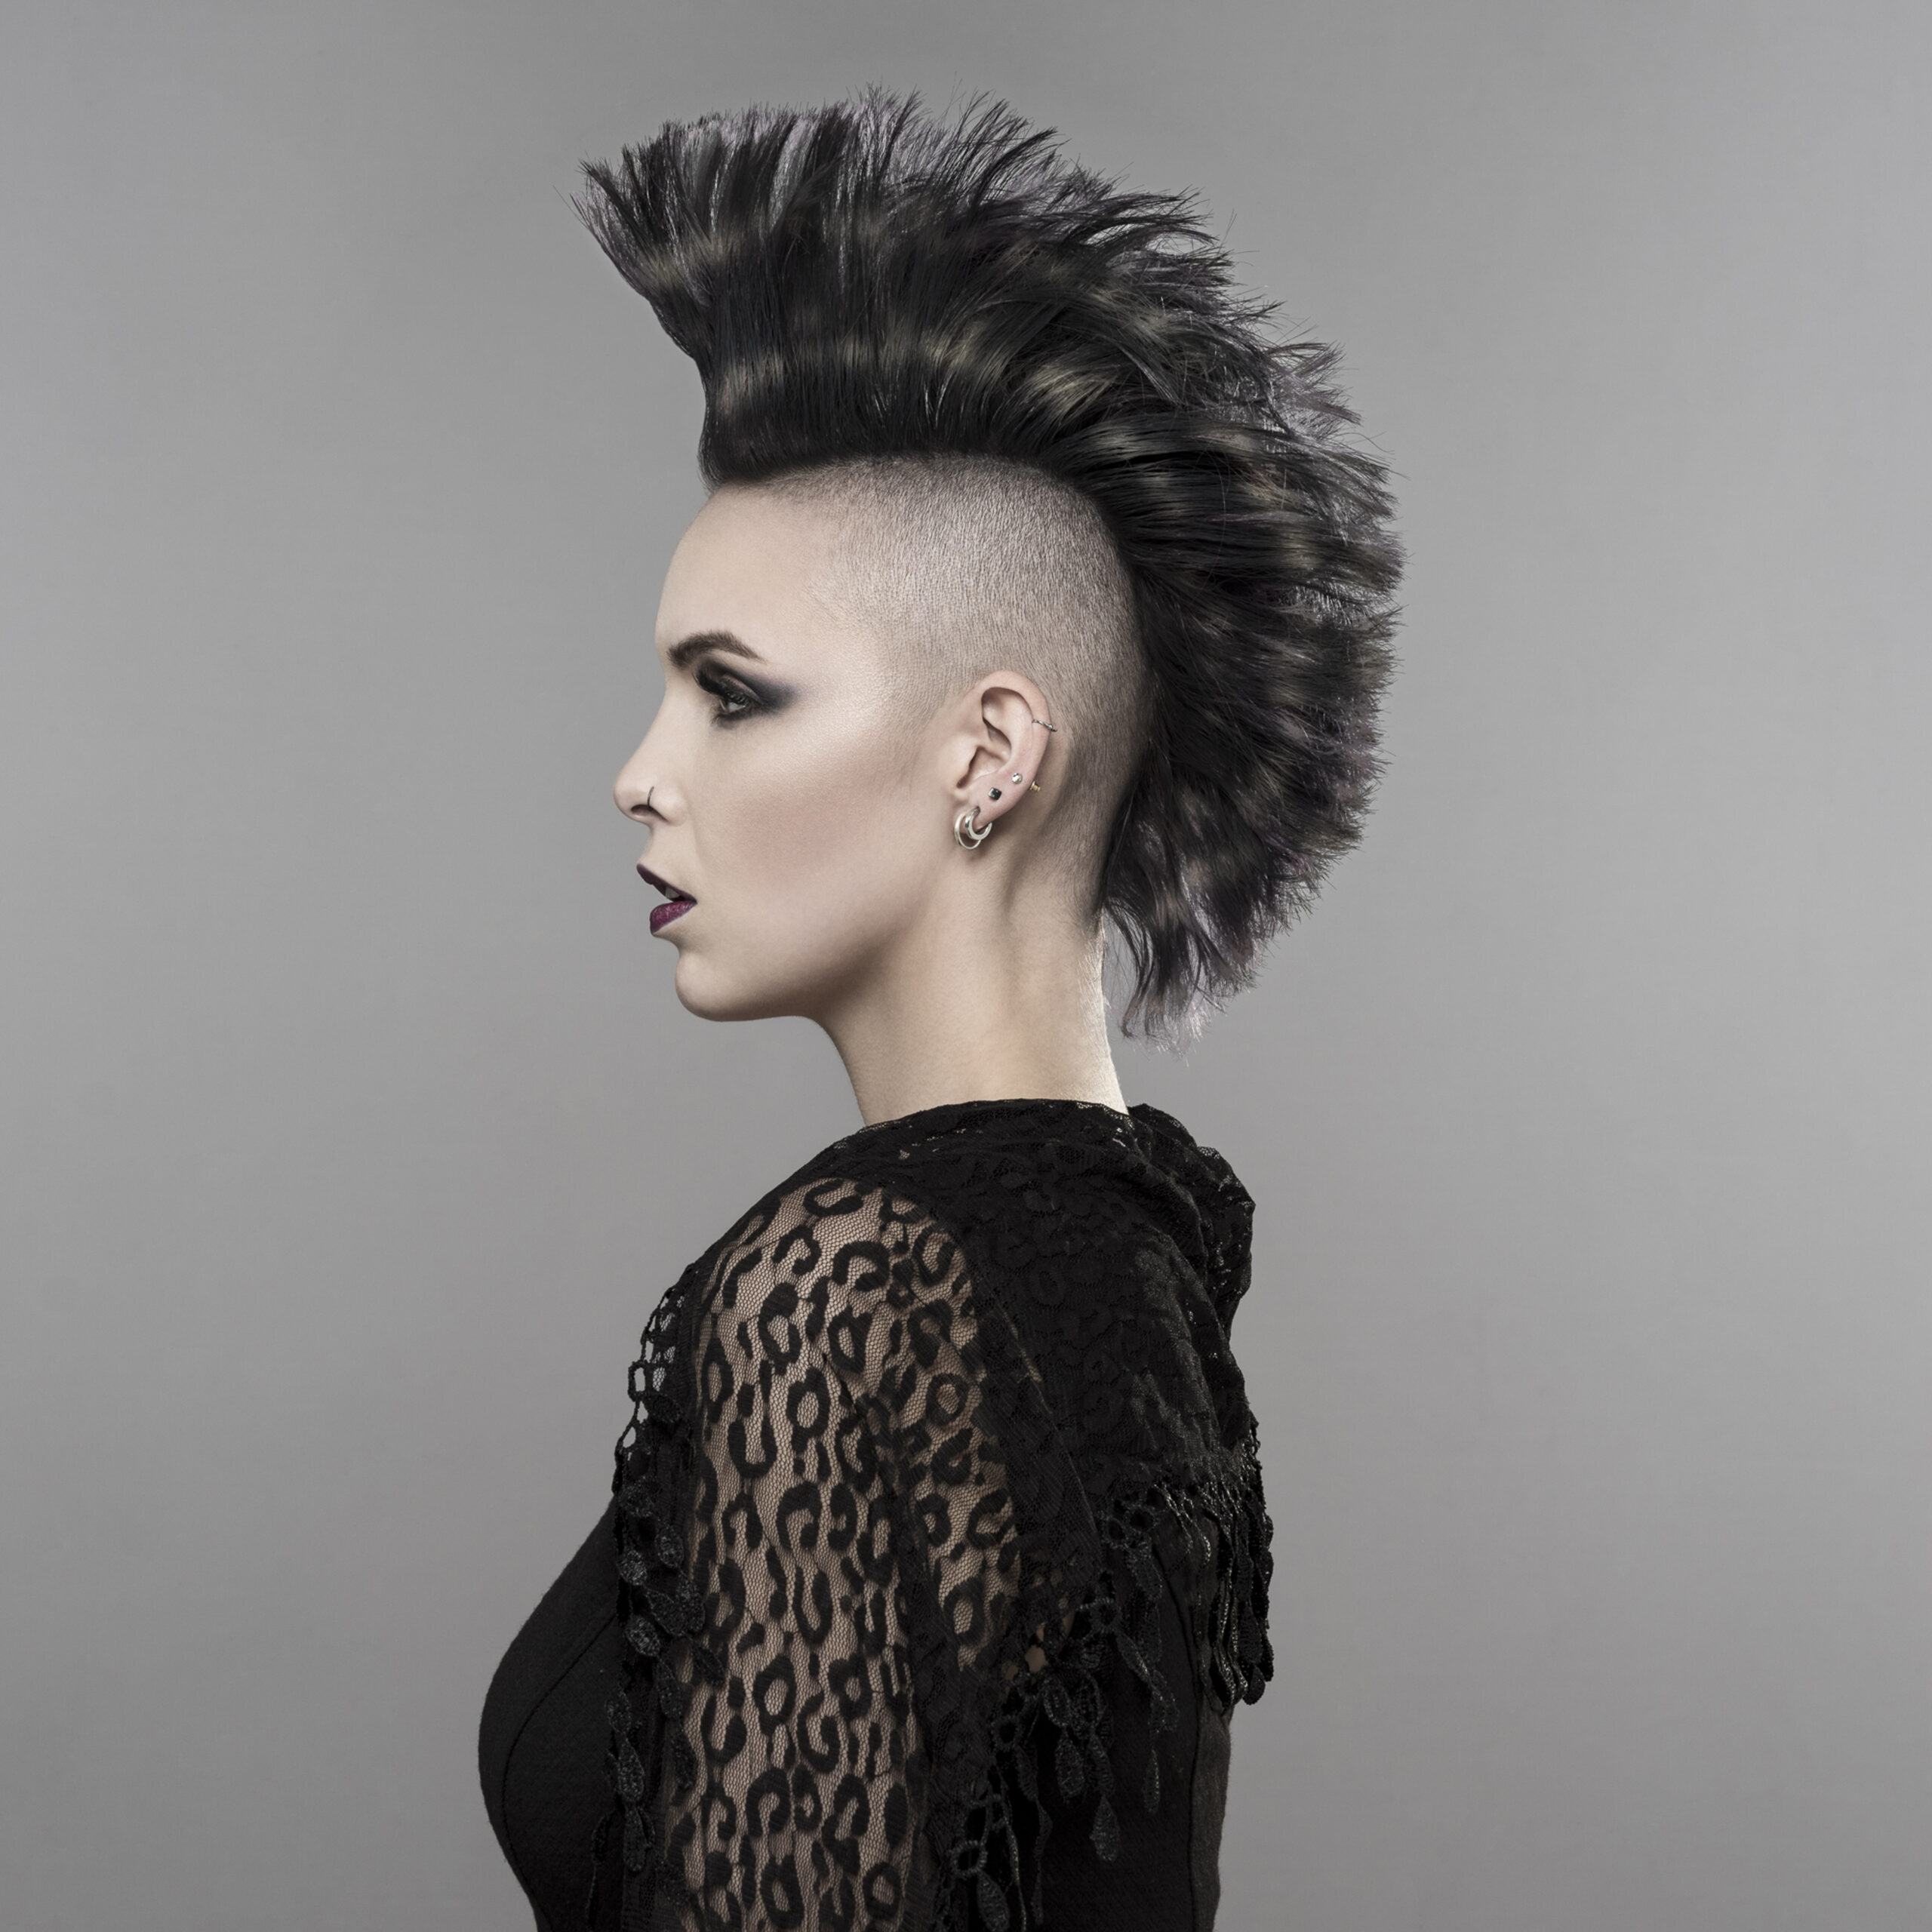 Goth girl with Mohican hairstyle seen from side